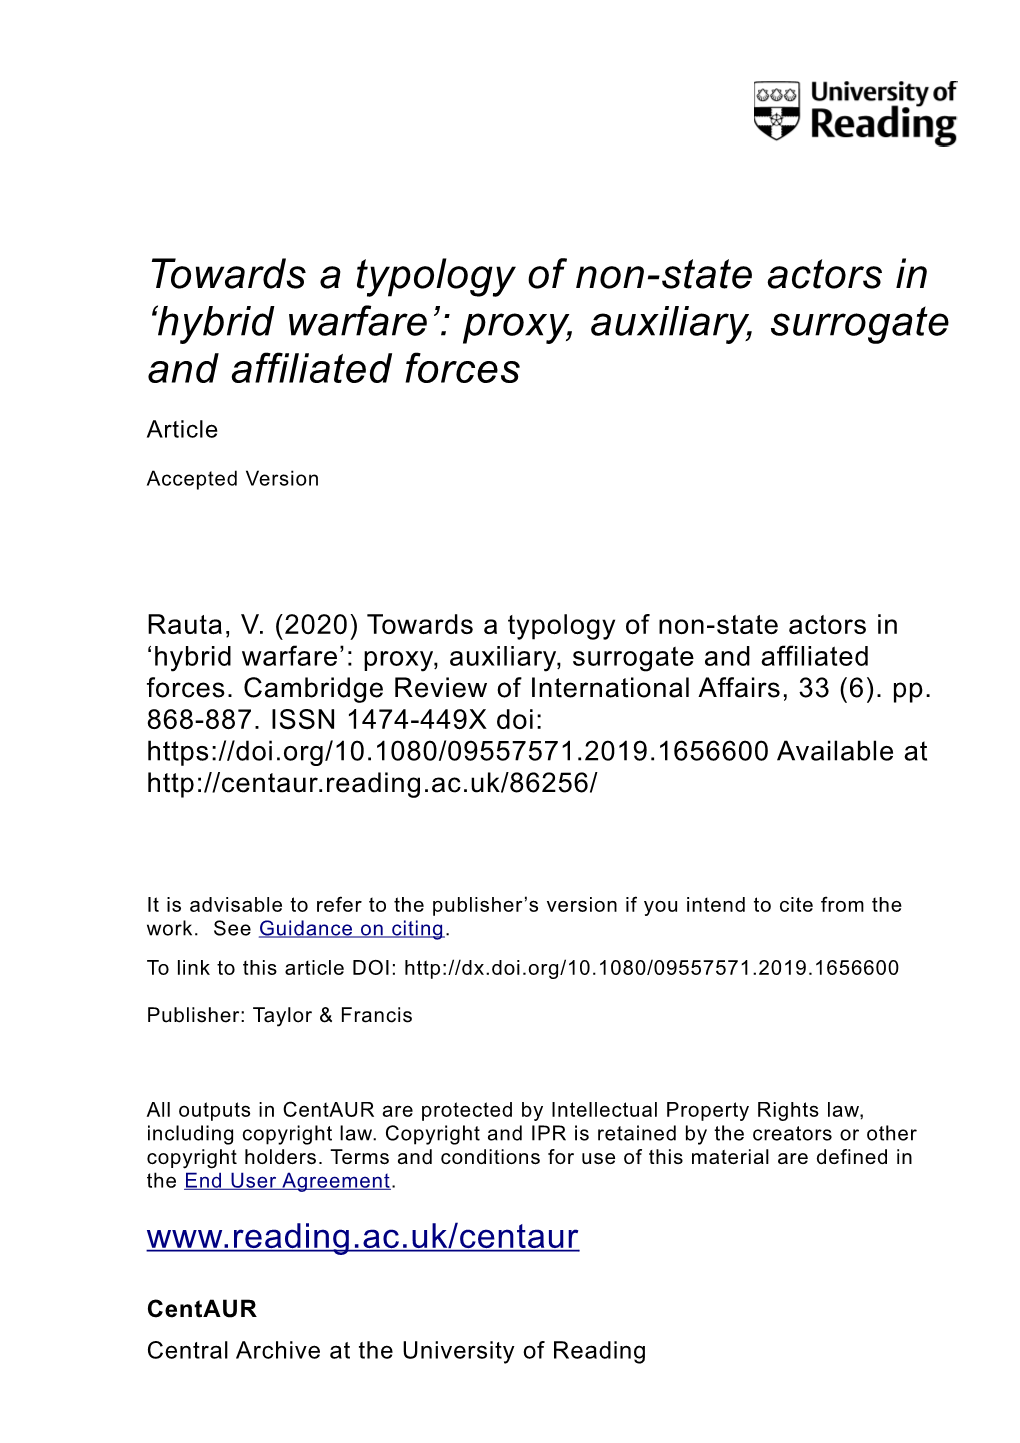 Towards a Typology of Non-State Actors in 'Hybrid Warfare'